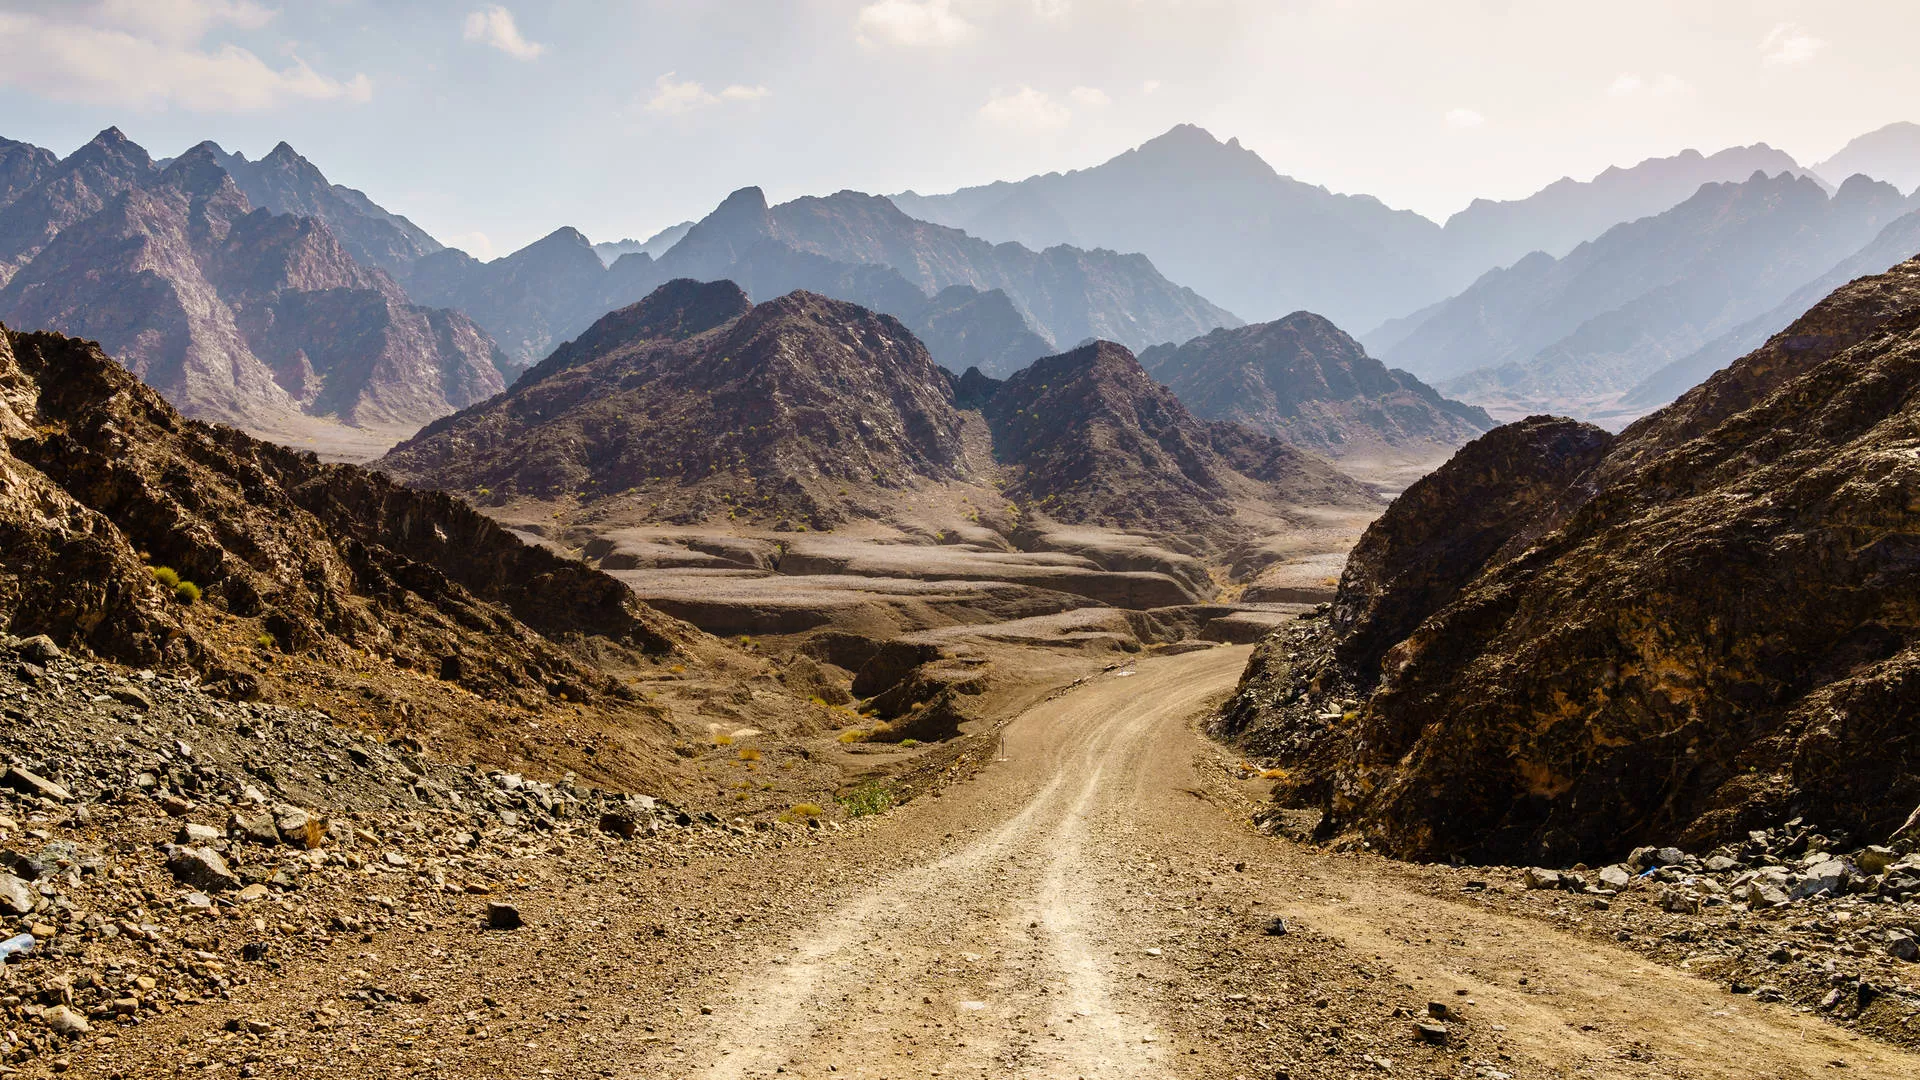 Hatta Mountain Trails in United Arab Emirates, Middle East | Trekking & Hiking - Rated 0.8